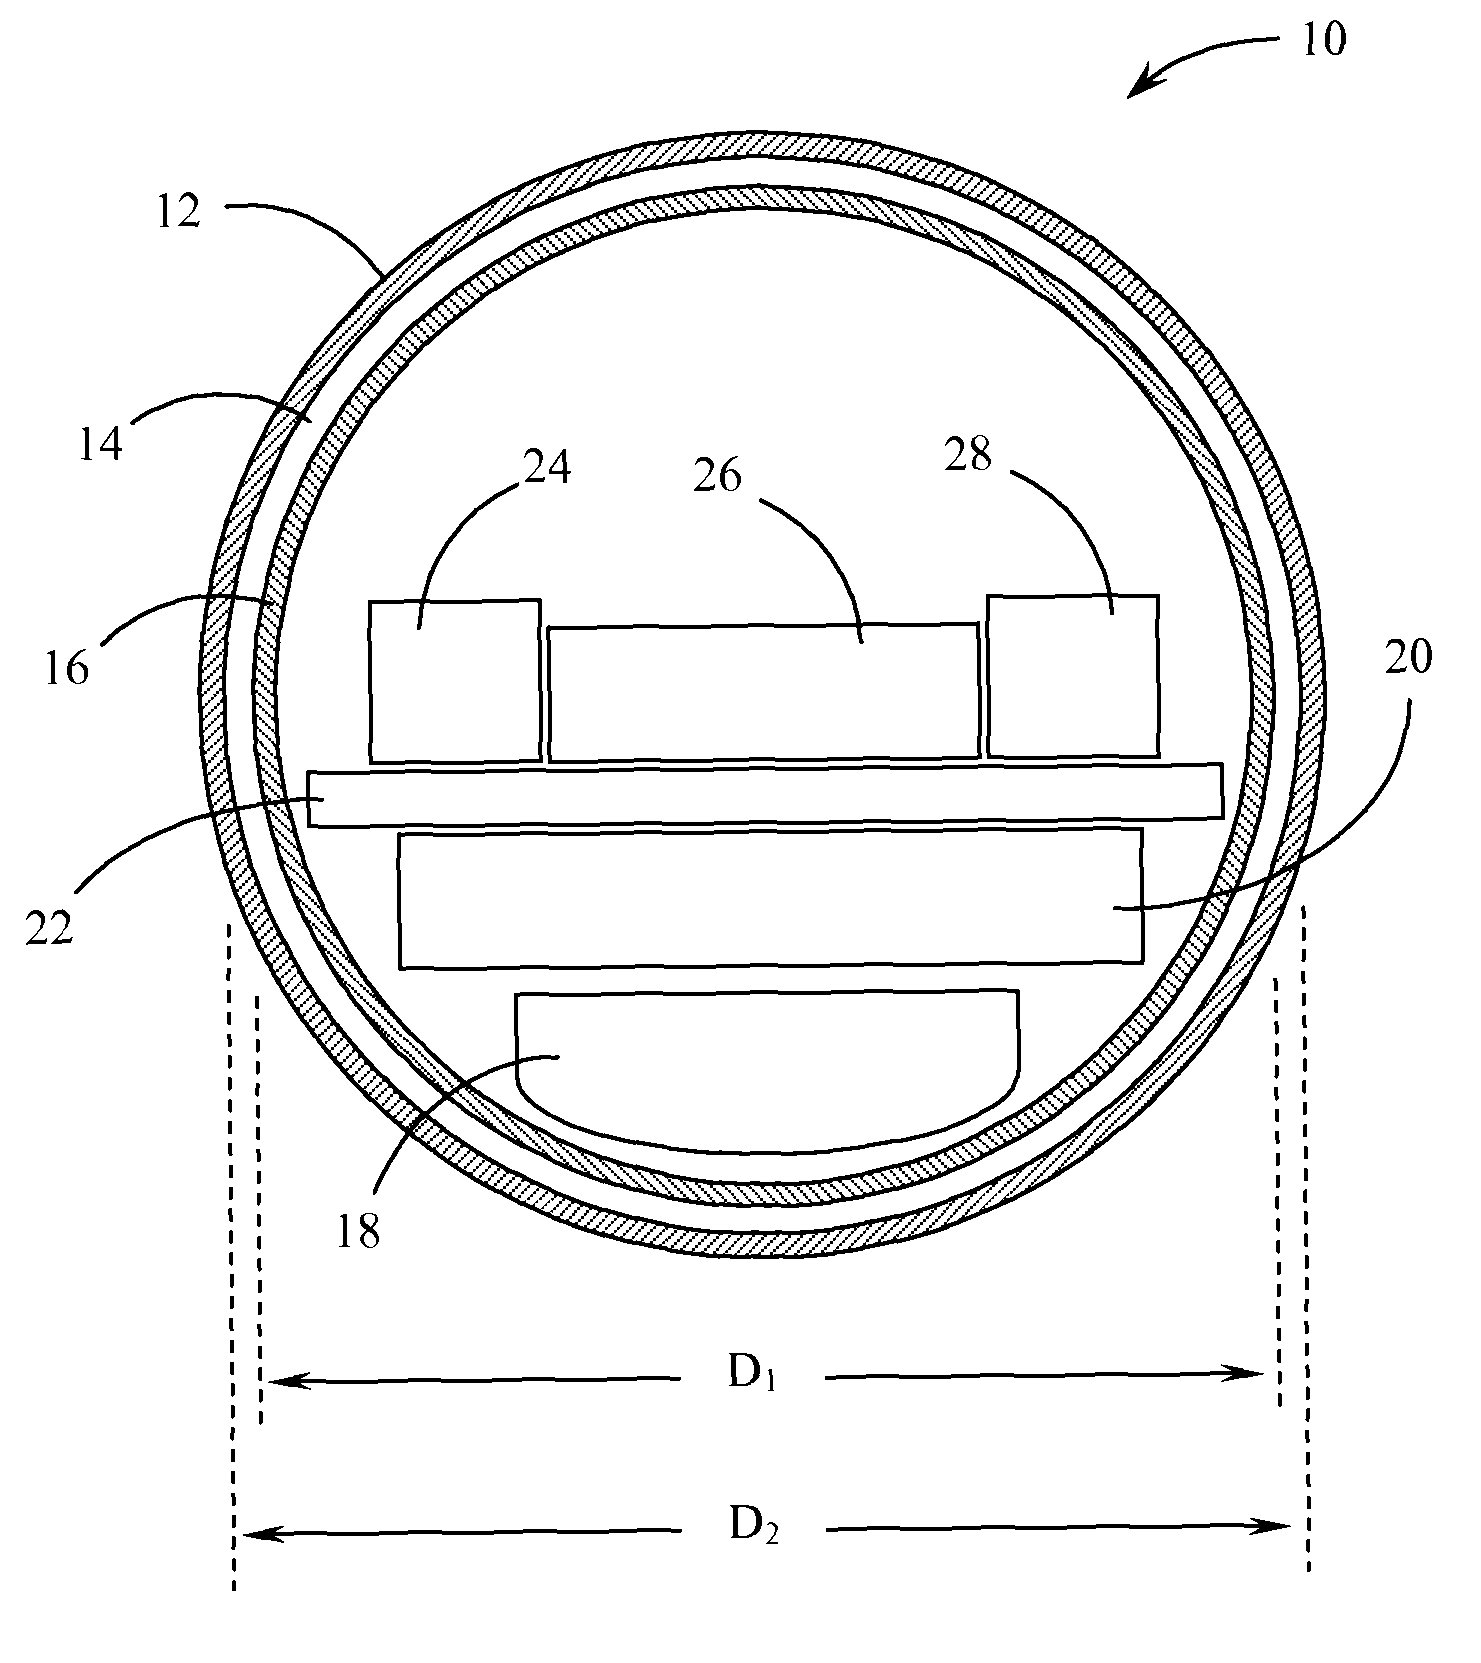 Fluidized sensor for mapping a pipeline